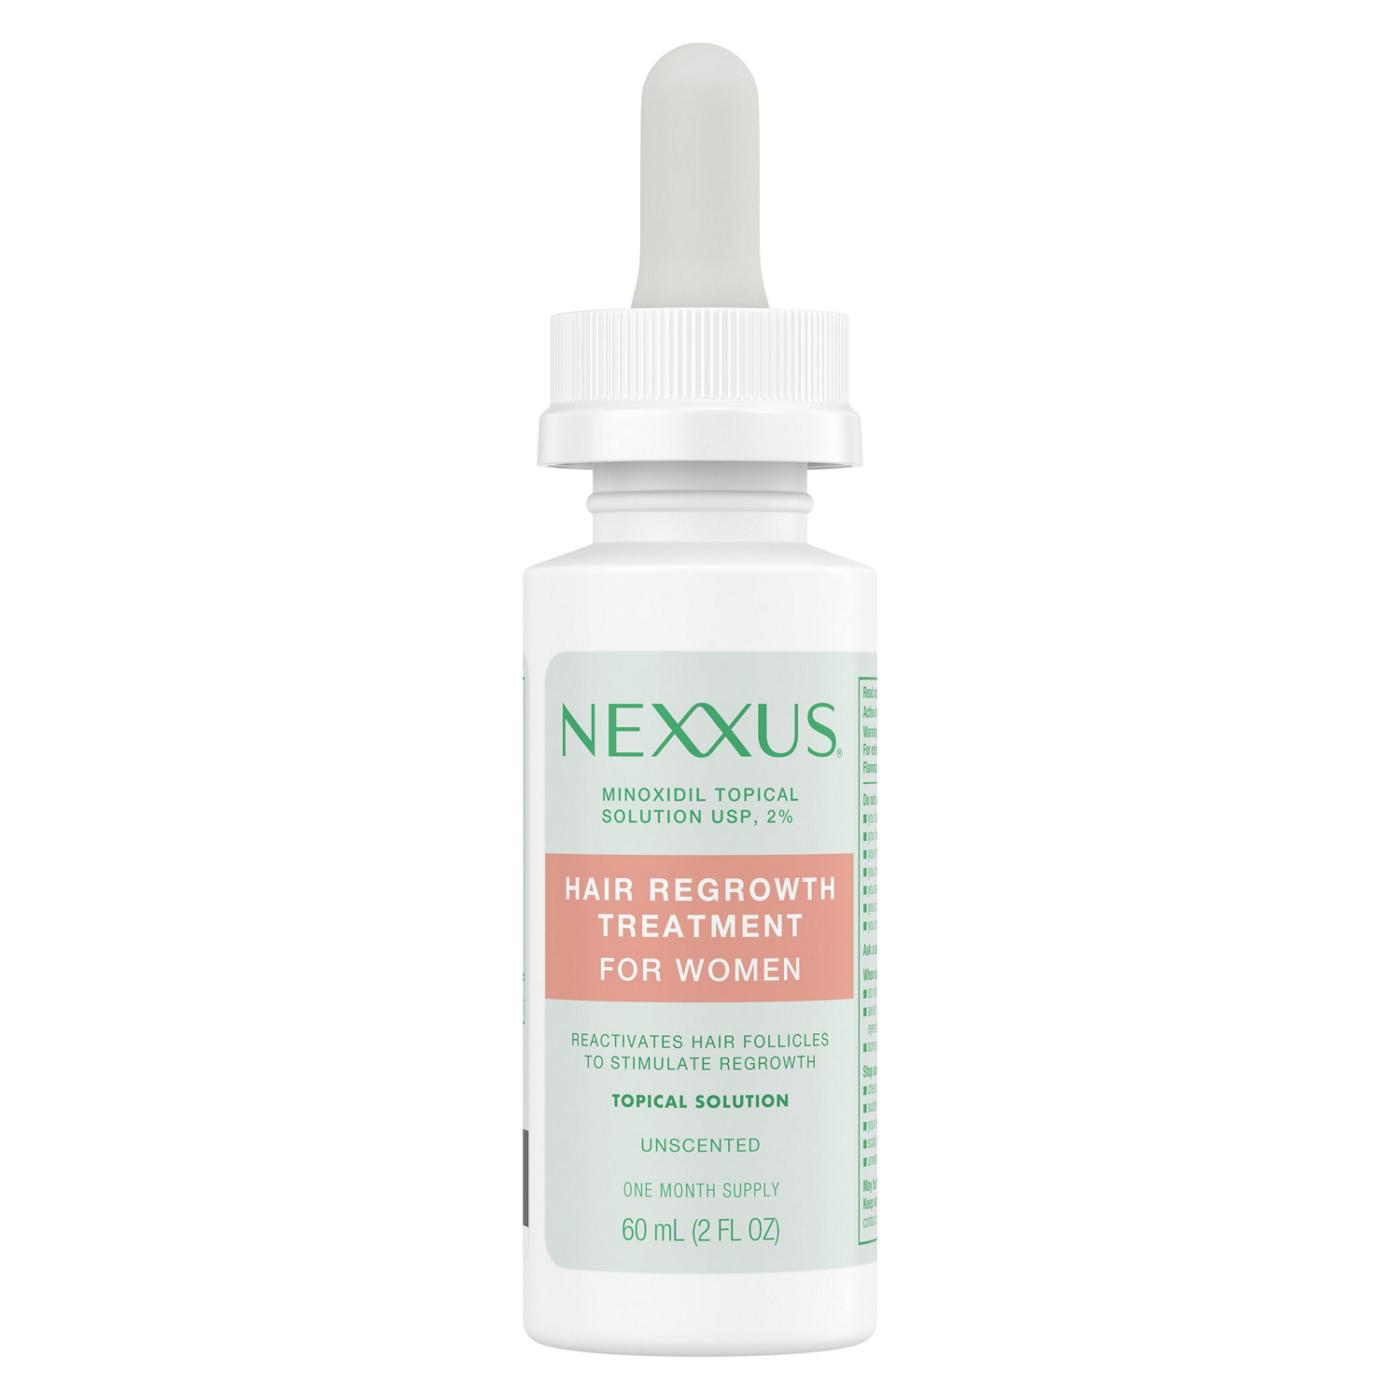 Nexxus Hair Regrowth Treatment for Women; image 1 of 4